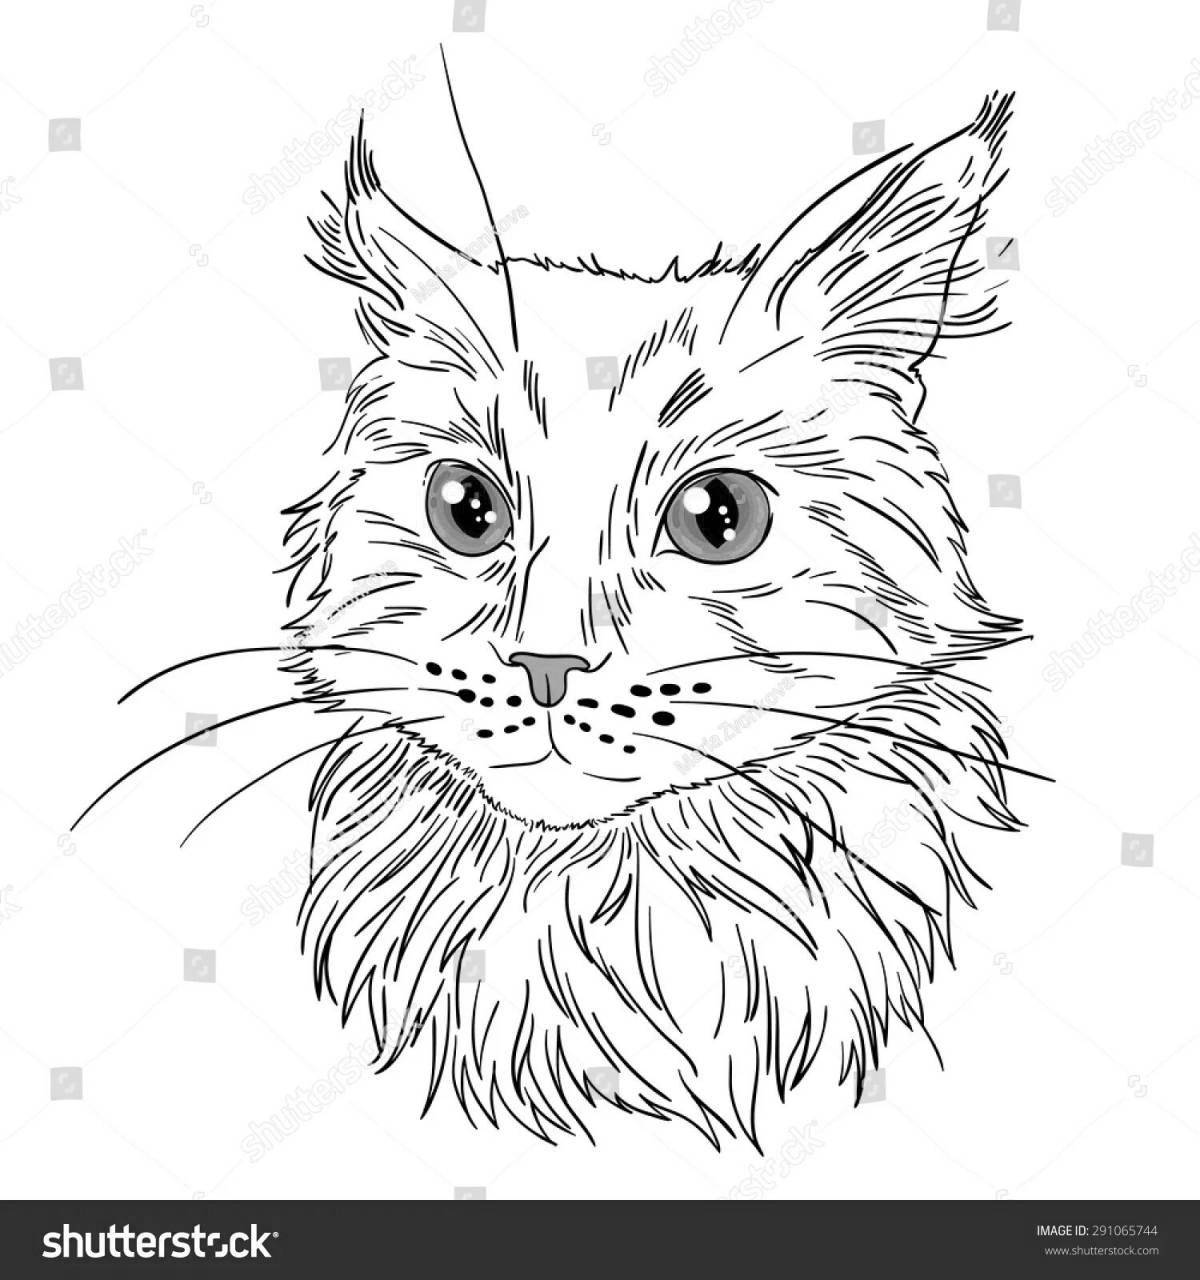 Fascinating Maine Coon cat coloring book